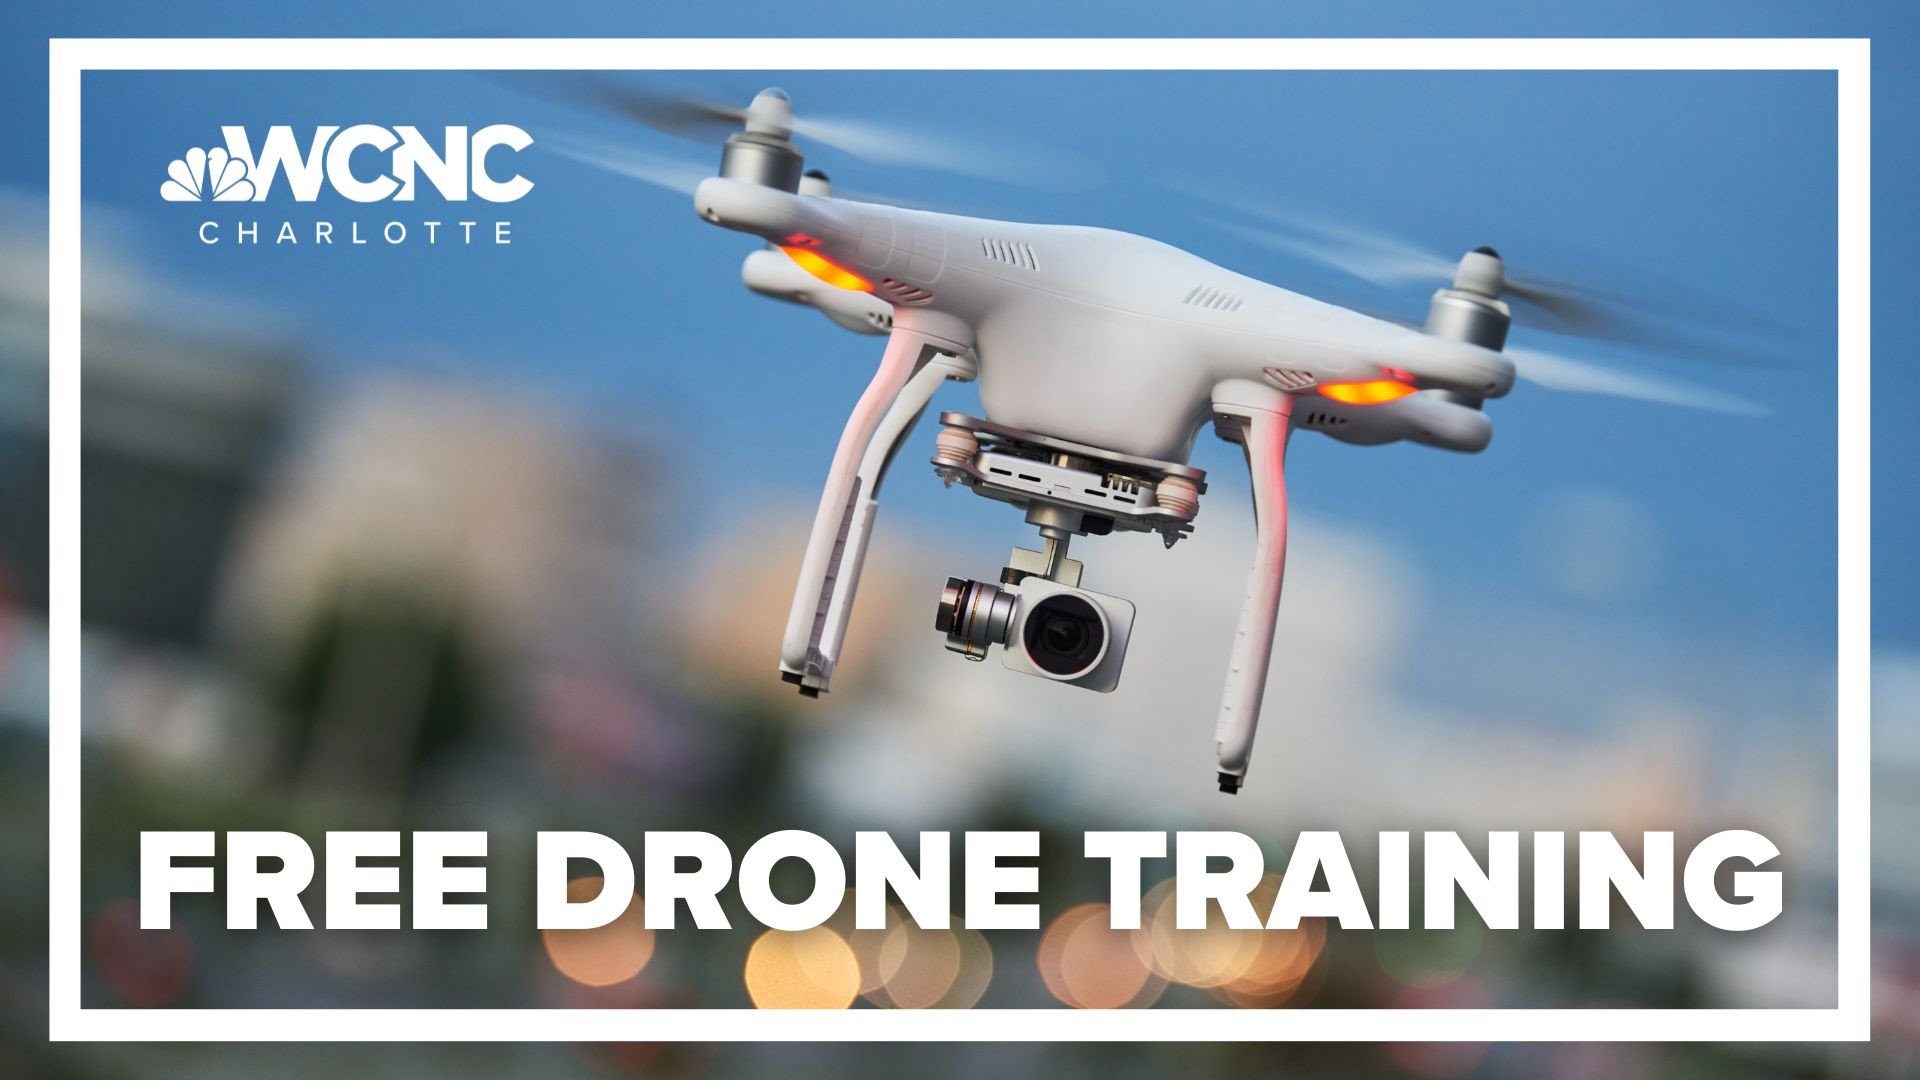 Datum celle Bryde igennem How you can get FAA-certified drone training for free in Charlotte |  wcnc.com